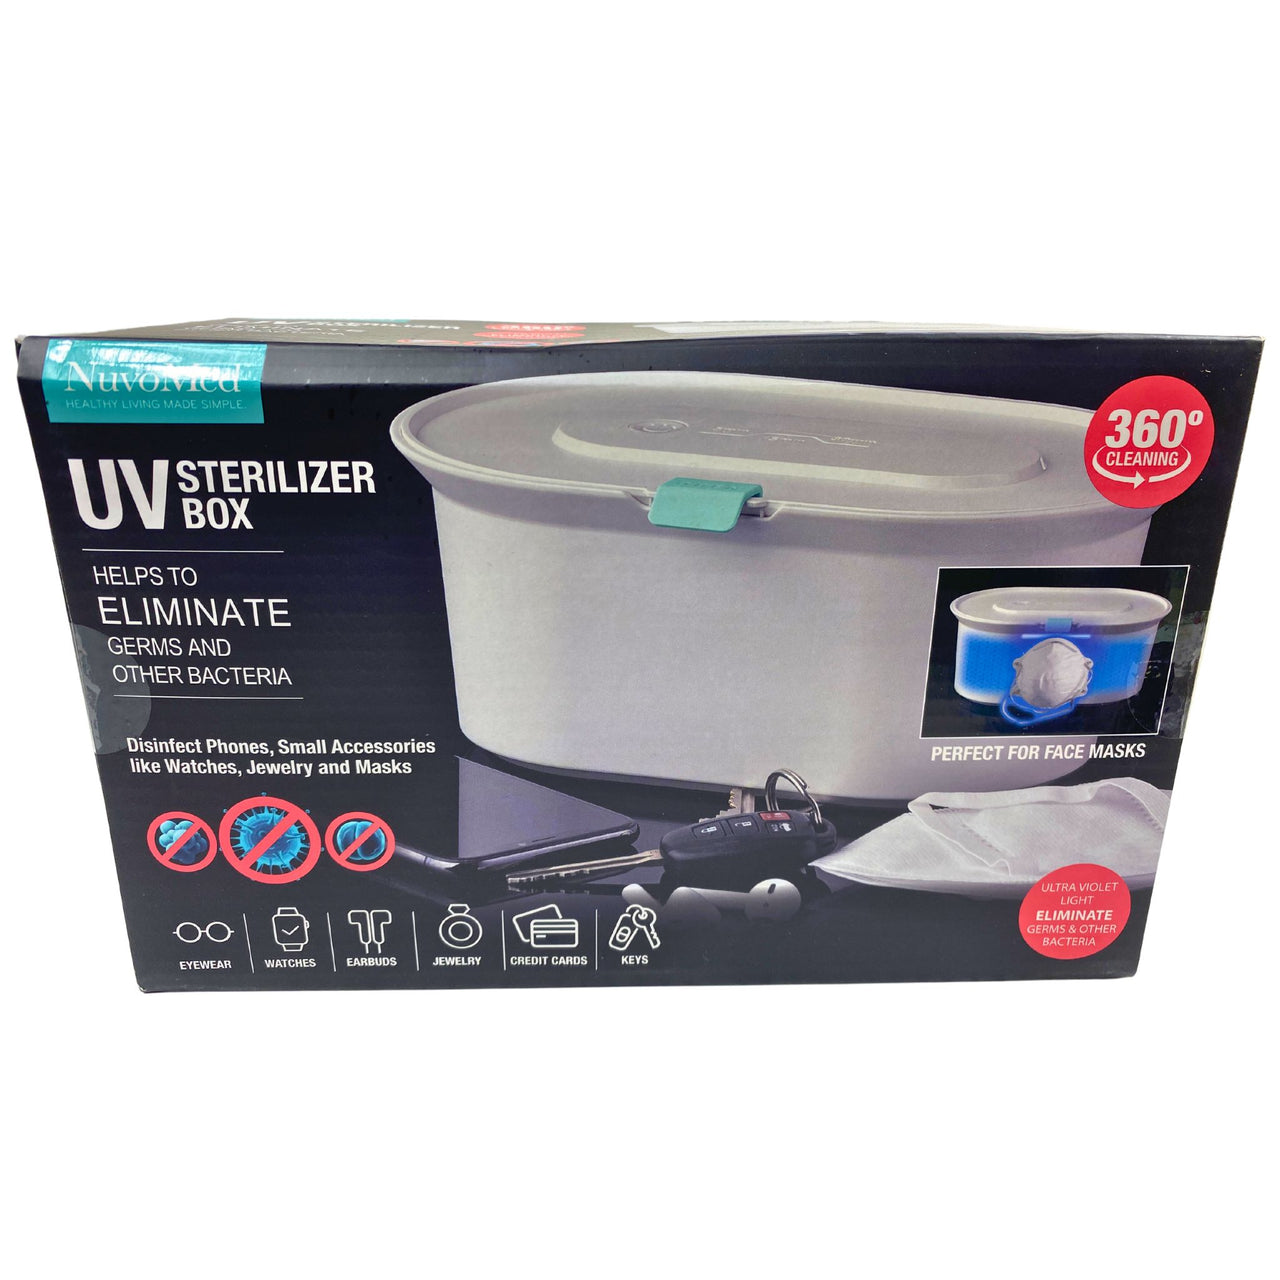 Nuvo Med UV Sterilizer Box 360 Cleaning Perfect for Face Masks 